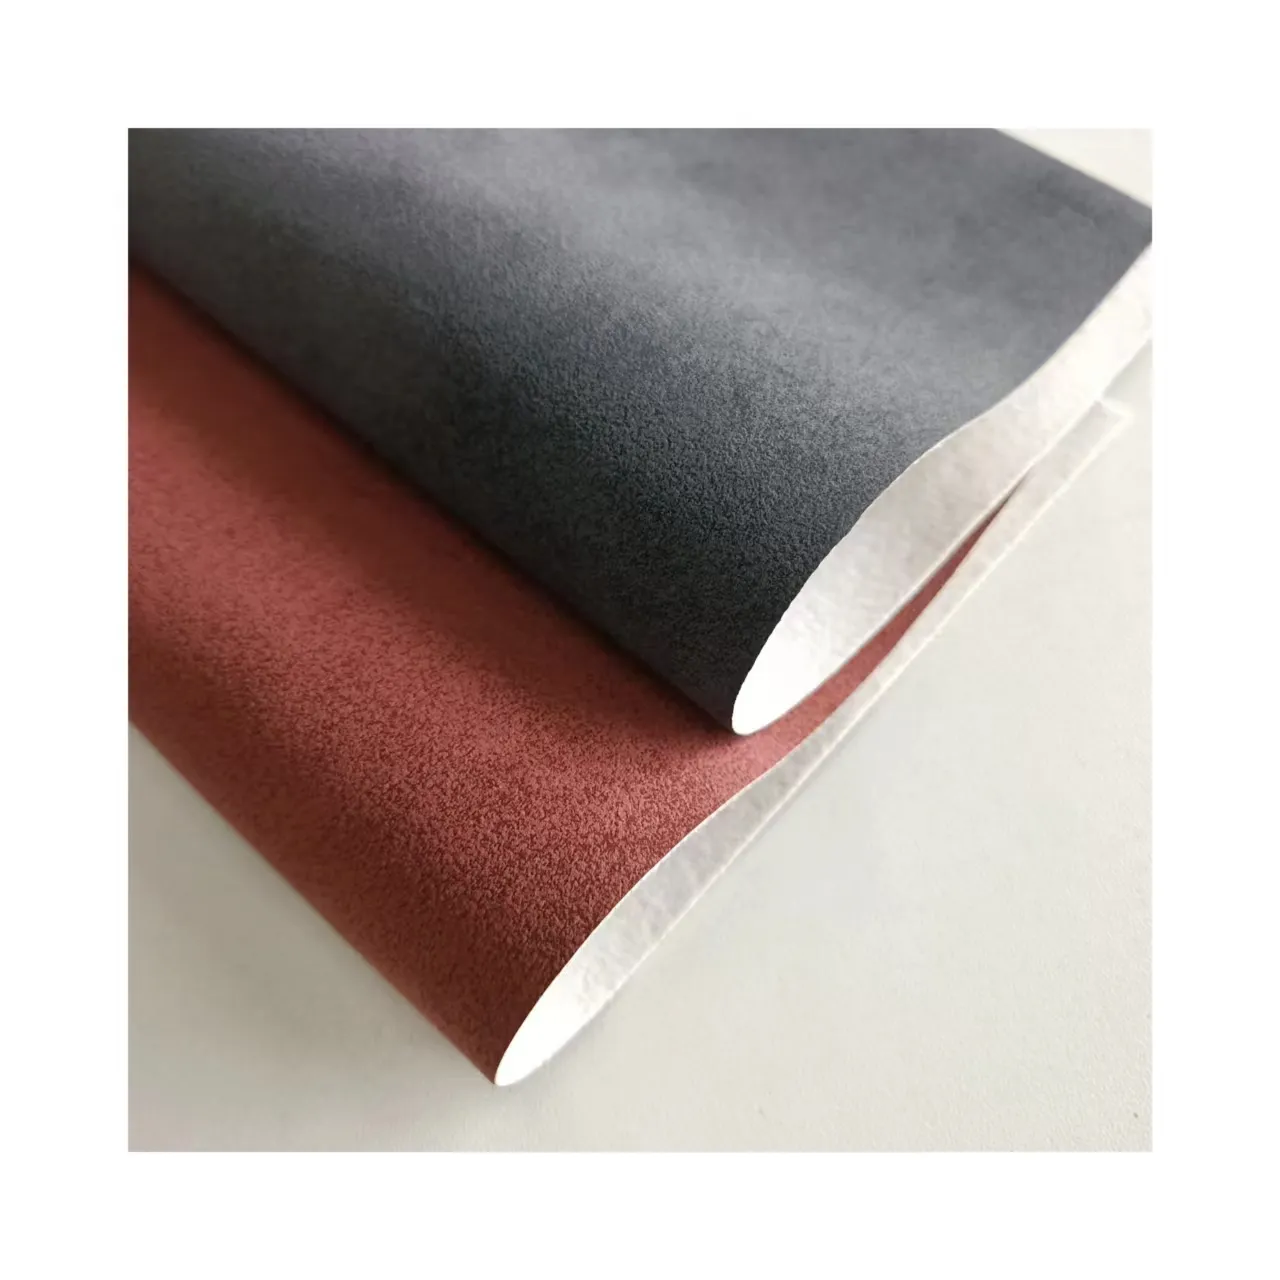 Primary suede fabric automotive leather for car upholstery ceiling headliner and door panel AB column